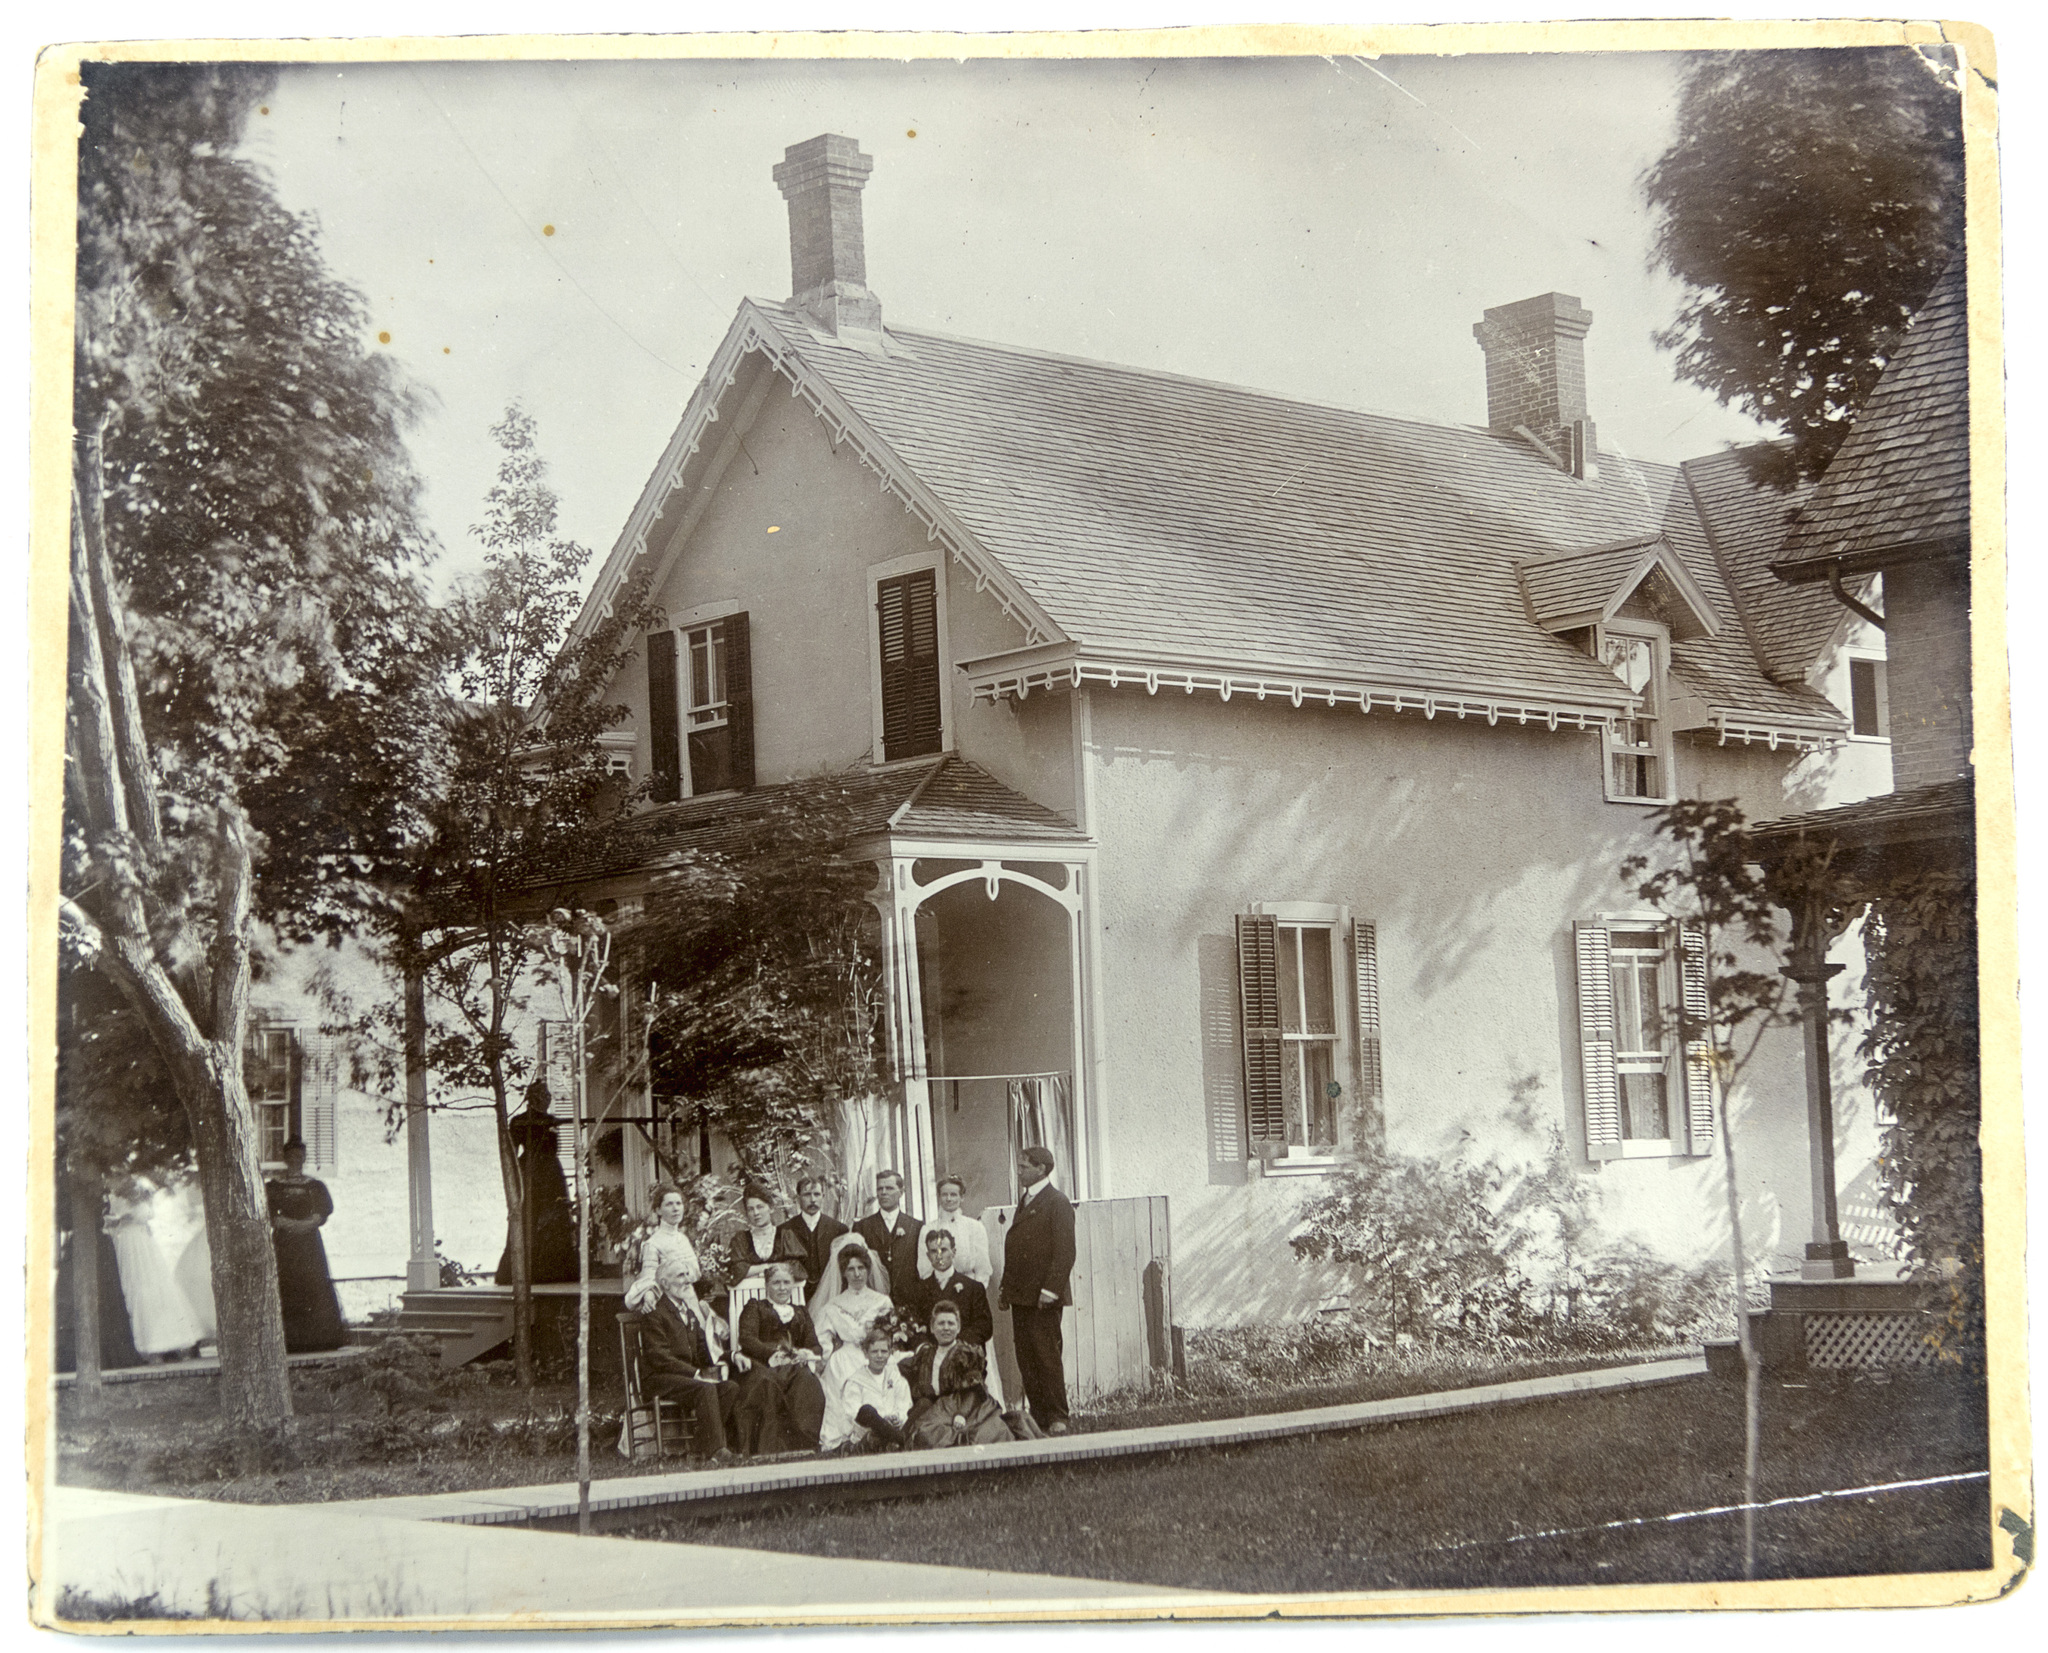 Black-and-white image of a wedding party gathered beside a house.